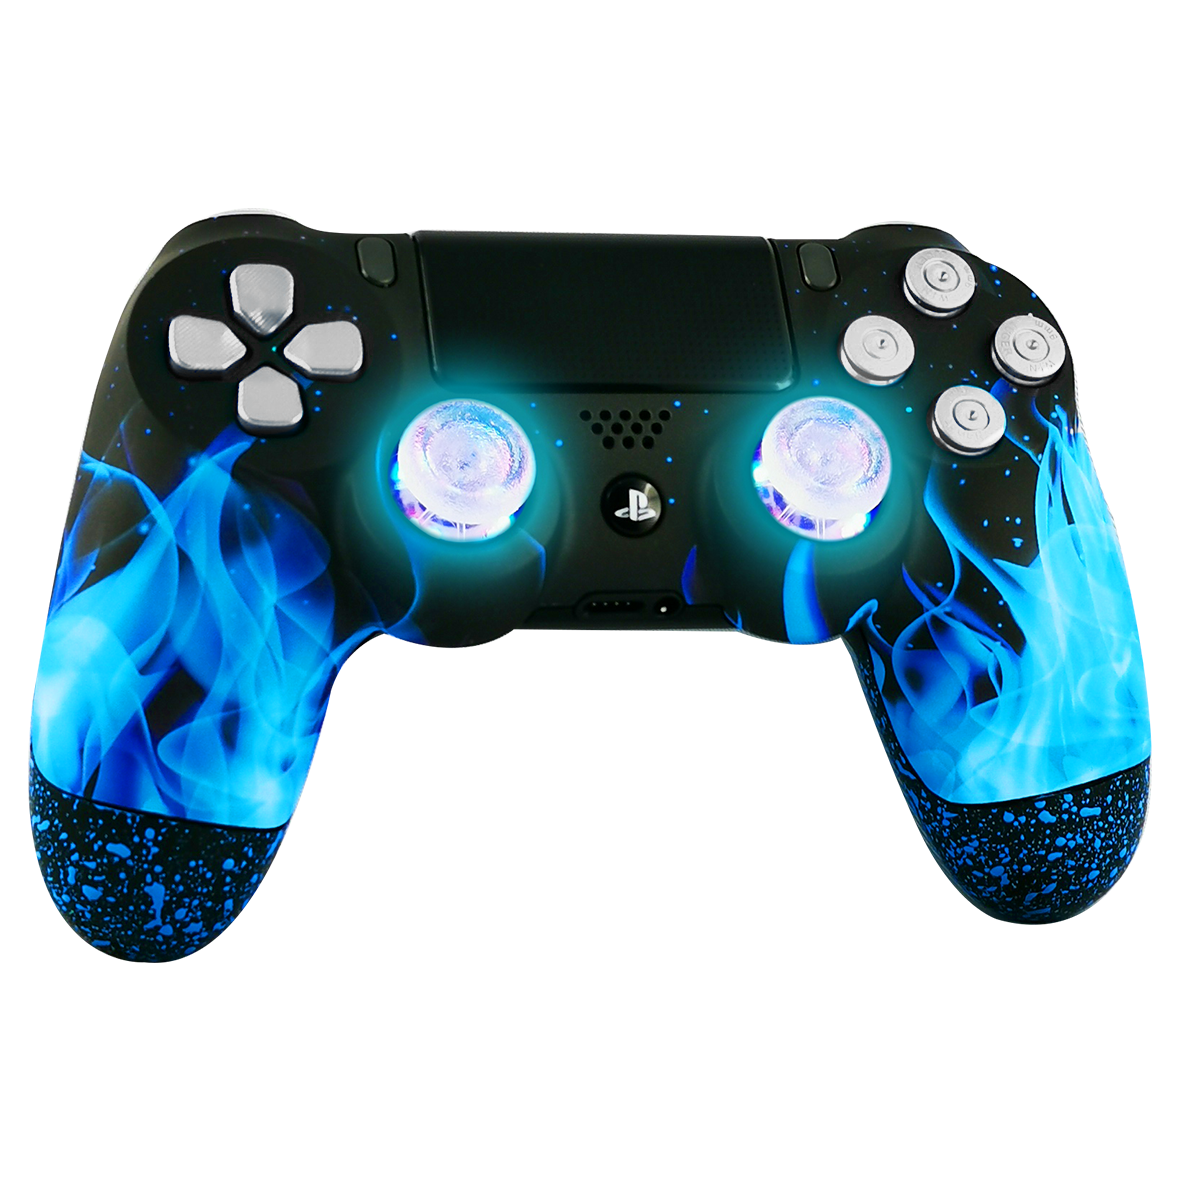 manette-PS4-custom-playstation-4-sony-personnalisee-drawmypad-centralia-argent-led